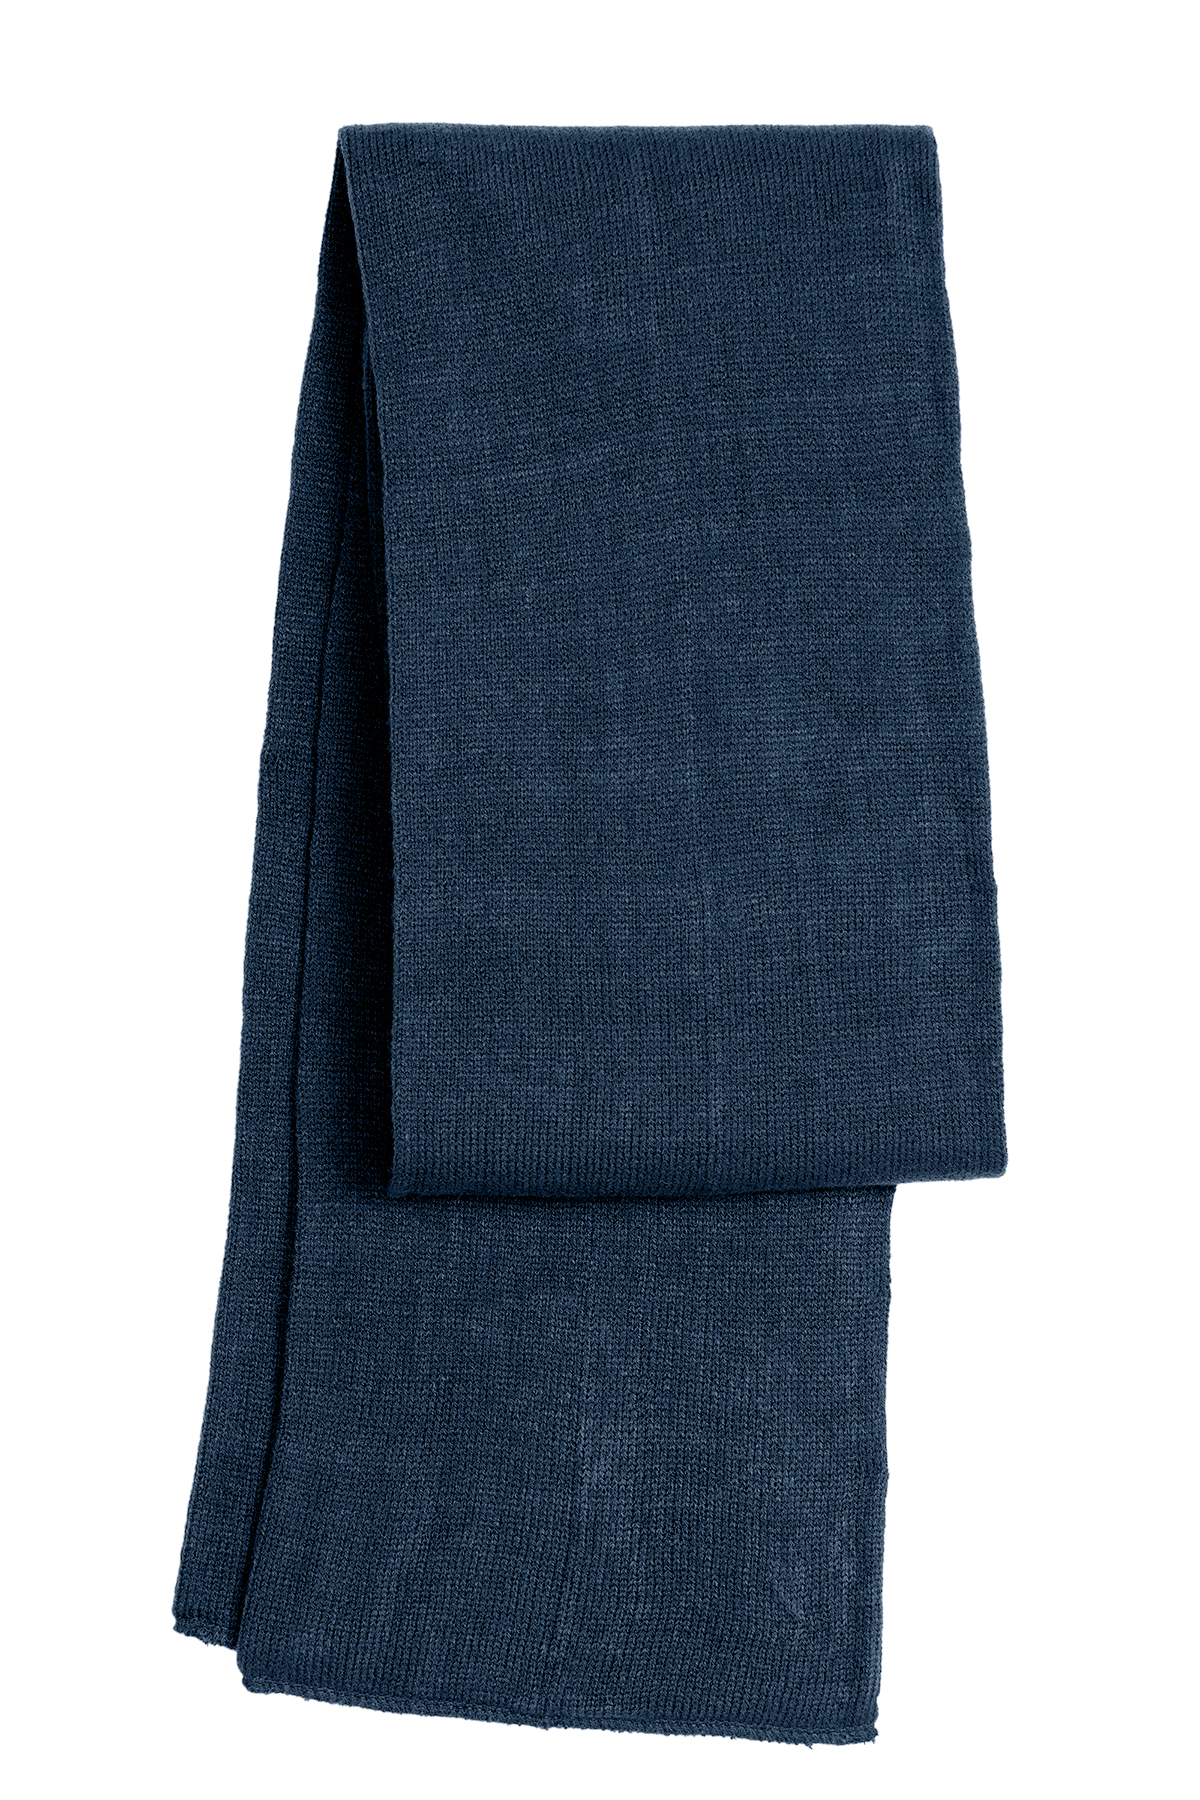 Port & Company - Knitted Scarf | Product | SanMar